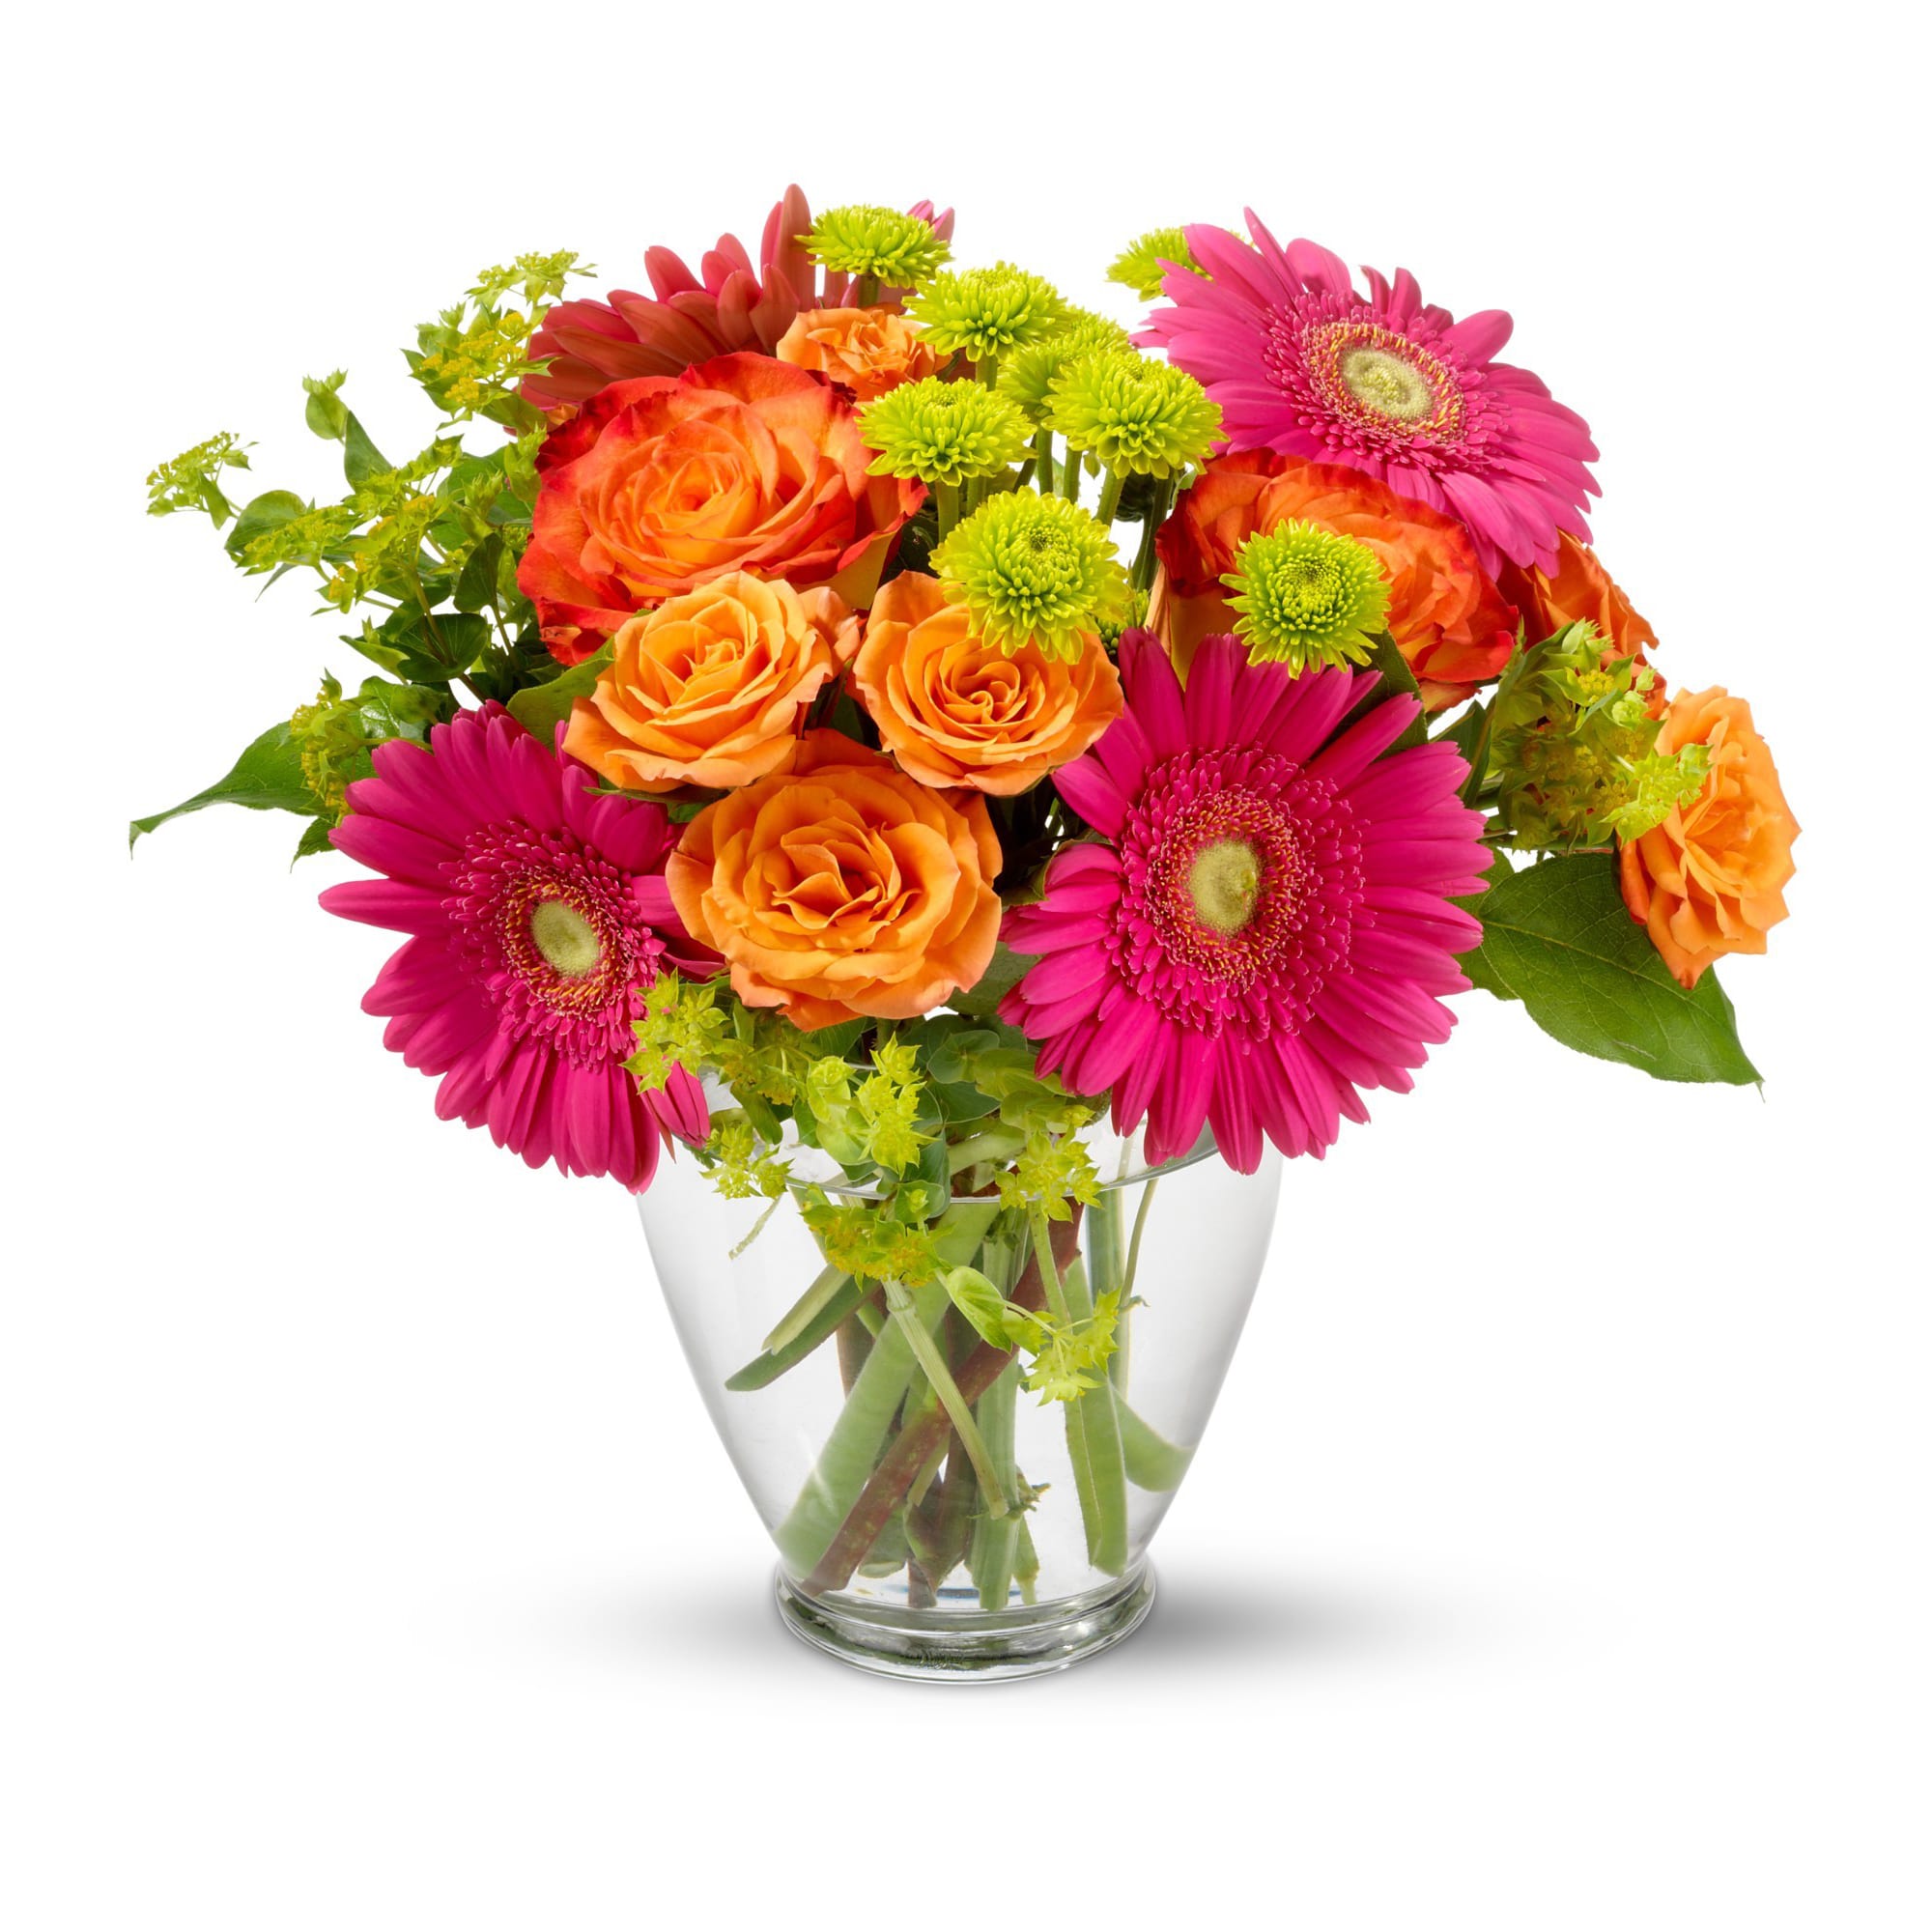 Rainbow's End - Hot fun in the summertime is here, and it's flowerific to be sure! This beautiful bouquet brings together a rainbow of the season's brightest blossoms.